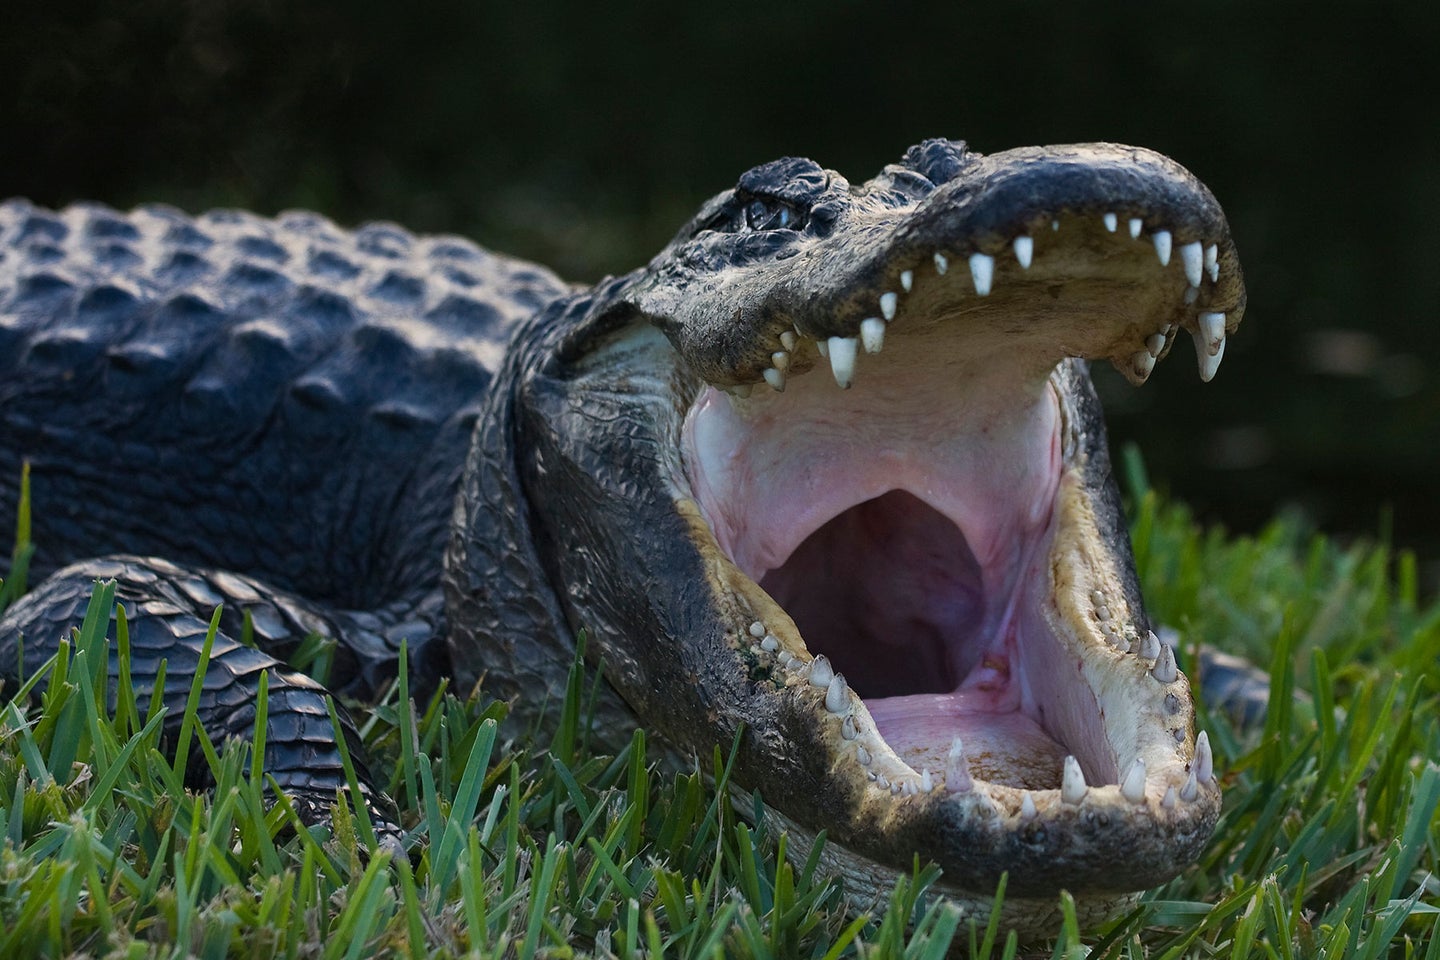 An alligator lies in a patch of green grass with its mouth wide open.